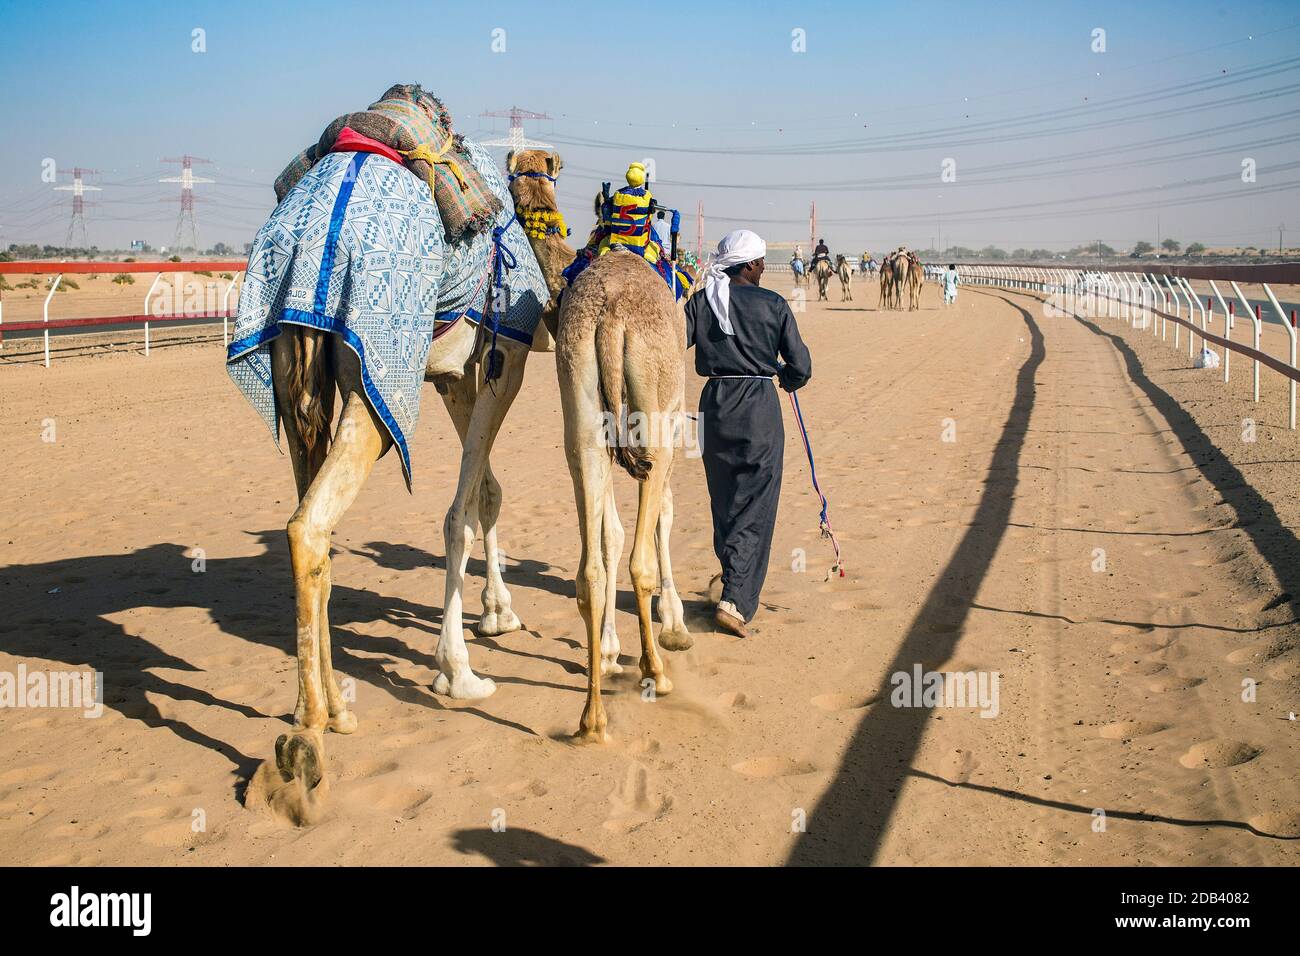 United Arab Emirates / Al Dhaid / Camel Race in Central Region of the Emirate of Sharjah in the United Arab EmiratesThe handlers also secure small ele Stock Photo